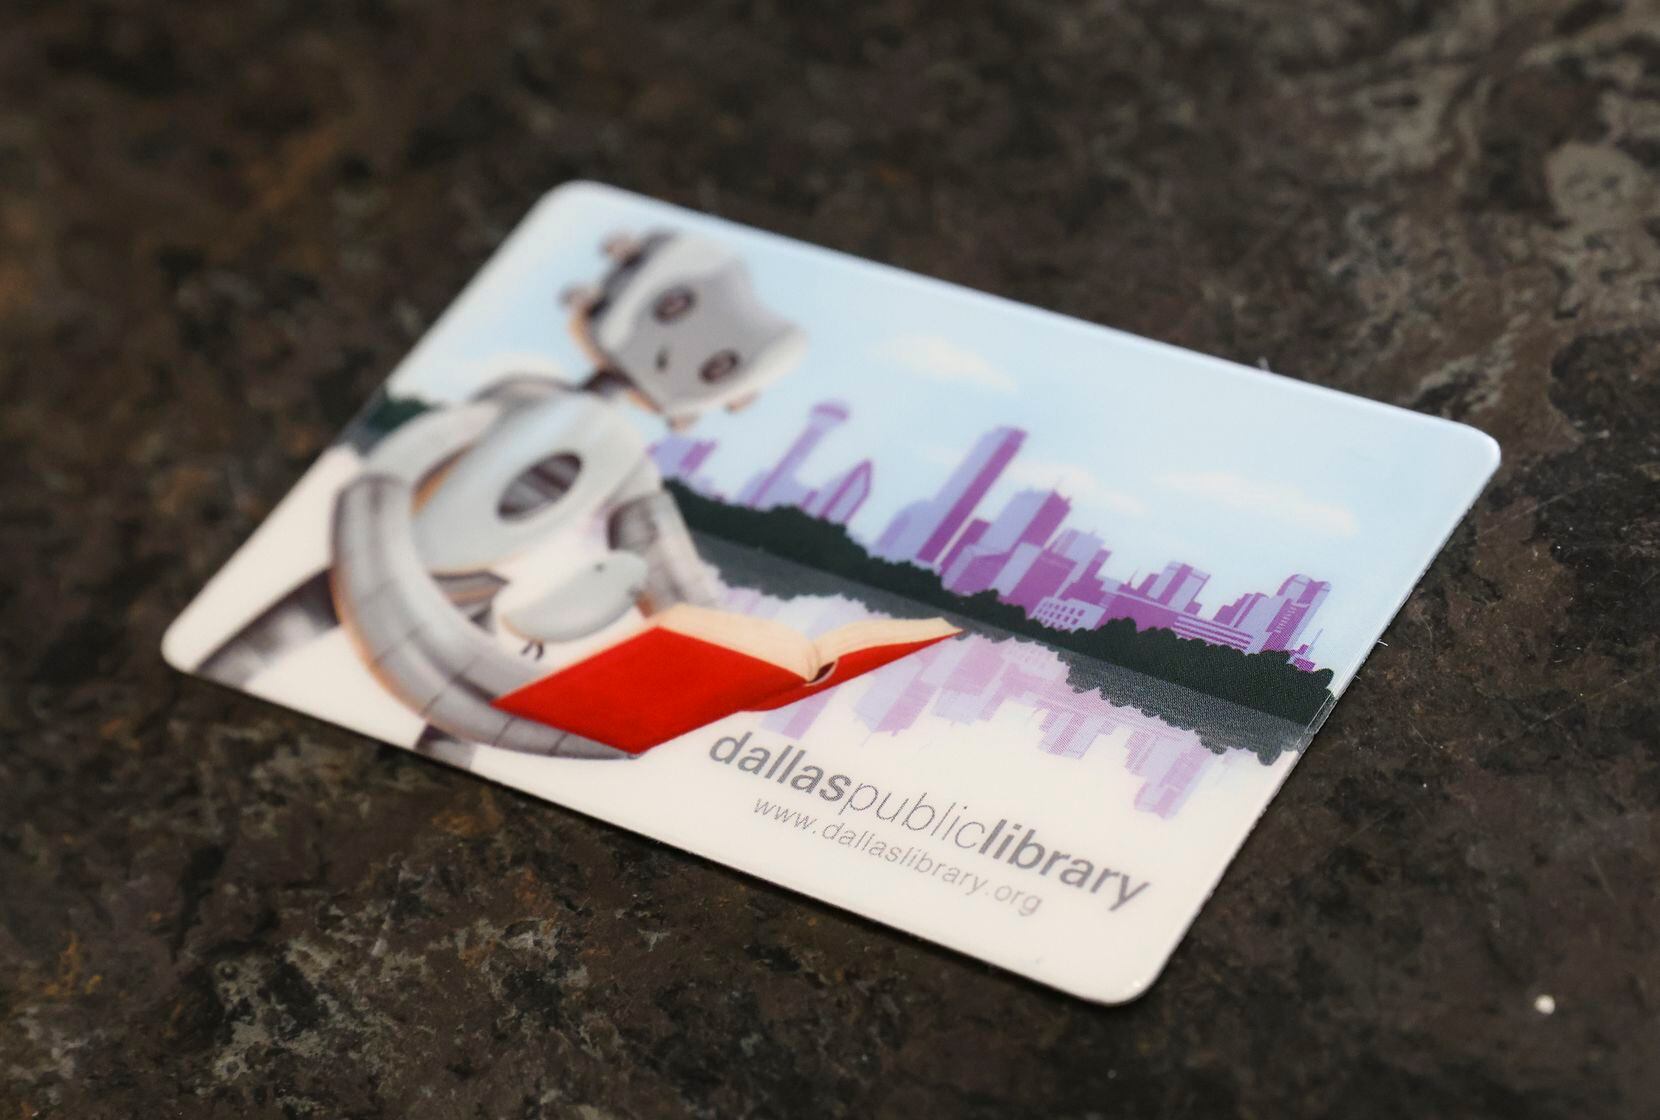 The Dallas Public Library Card issued to Dallas County residents on June 10, 2022. A library...